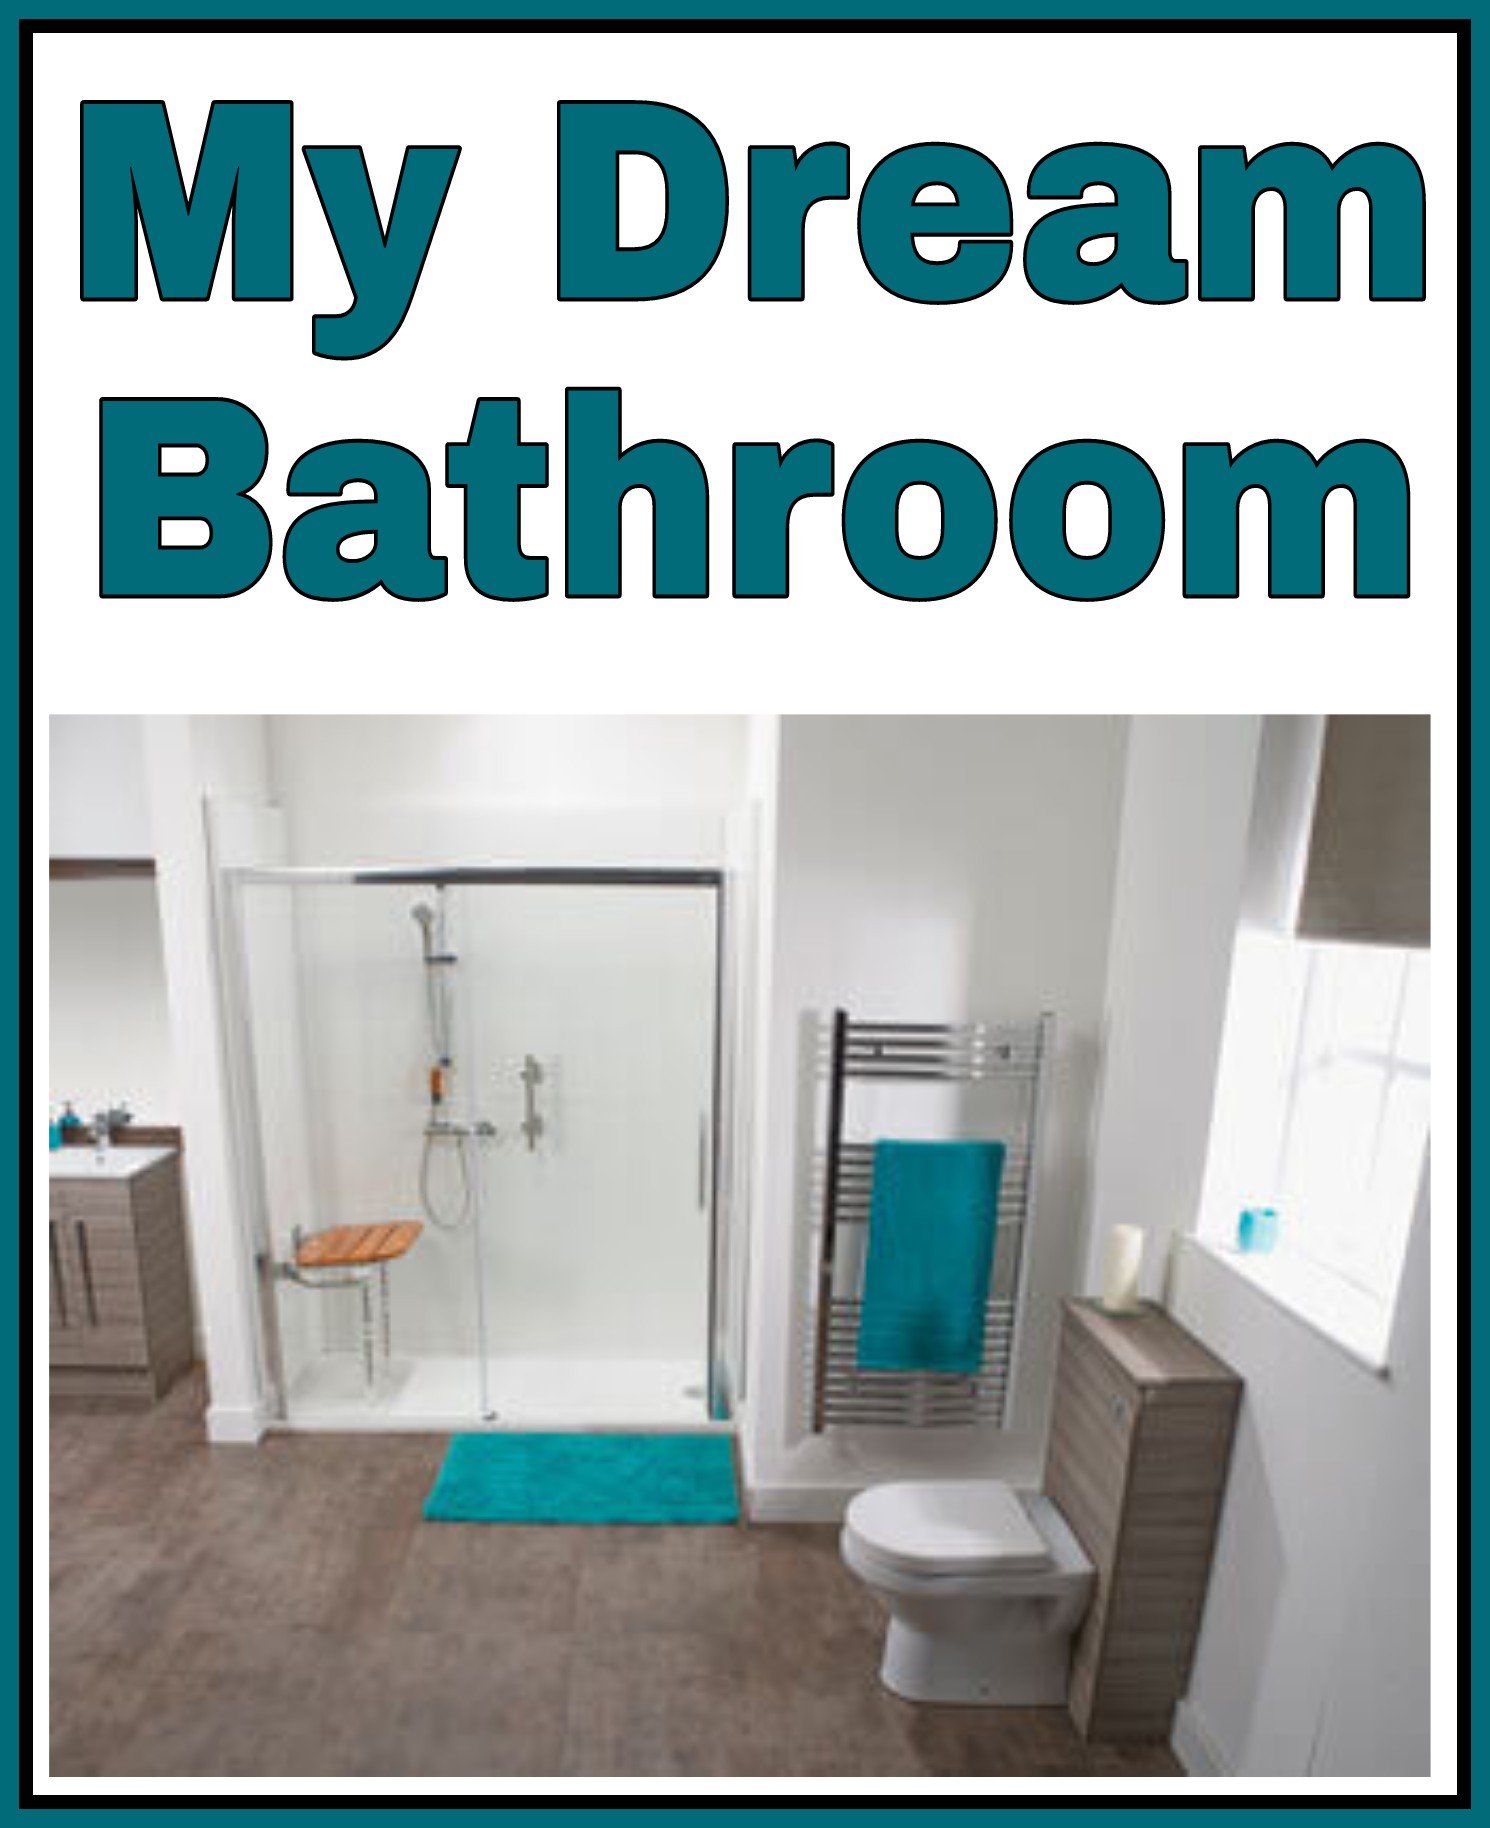 A photo of a spacious bright bathroom with walk in shower. Title My Dream Bathroom written above.